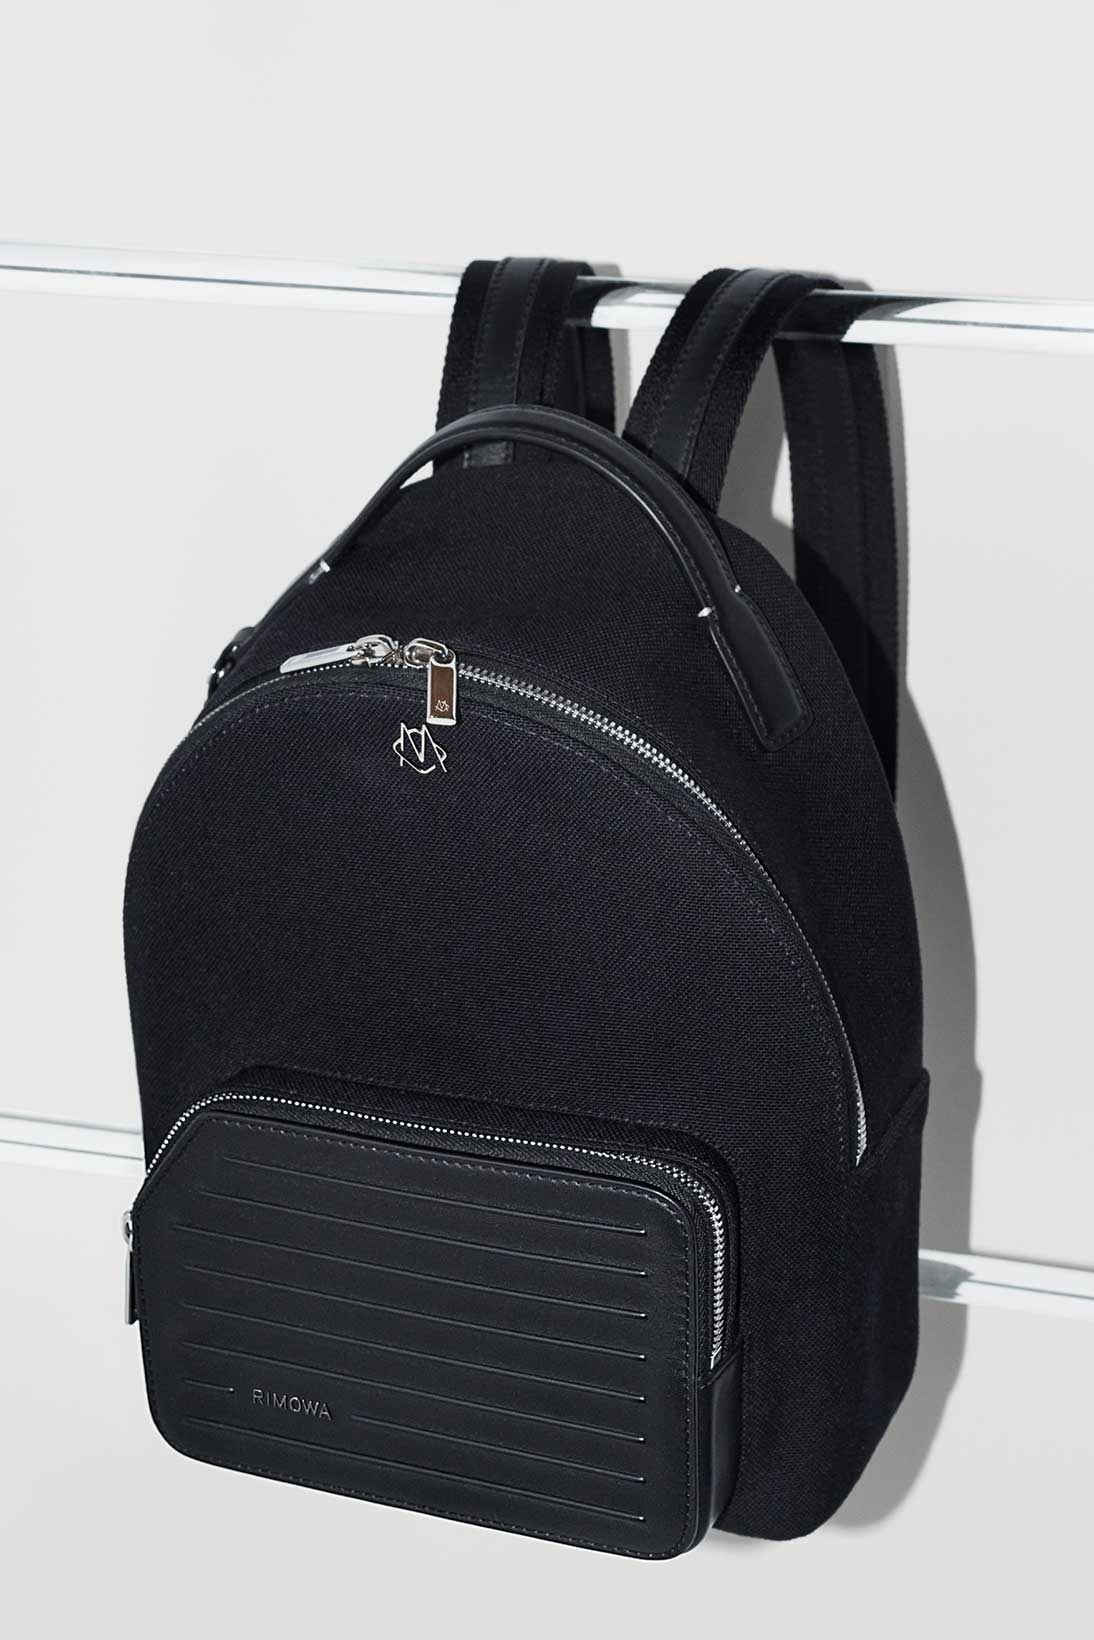 rimowa never still collection backpack black